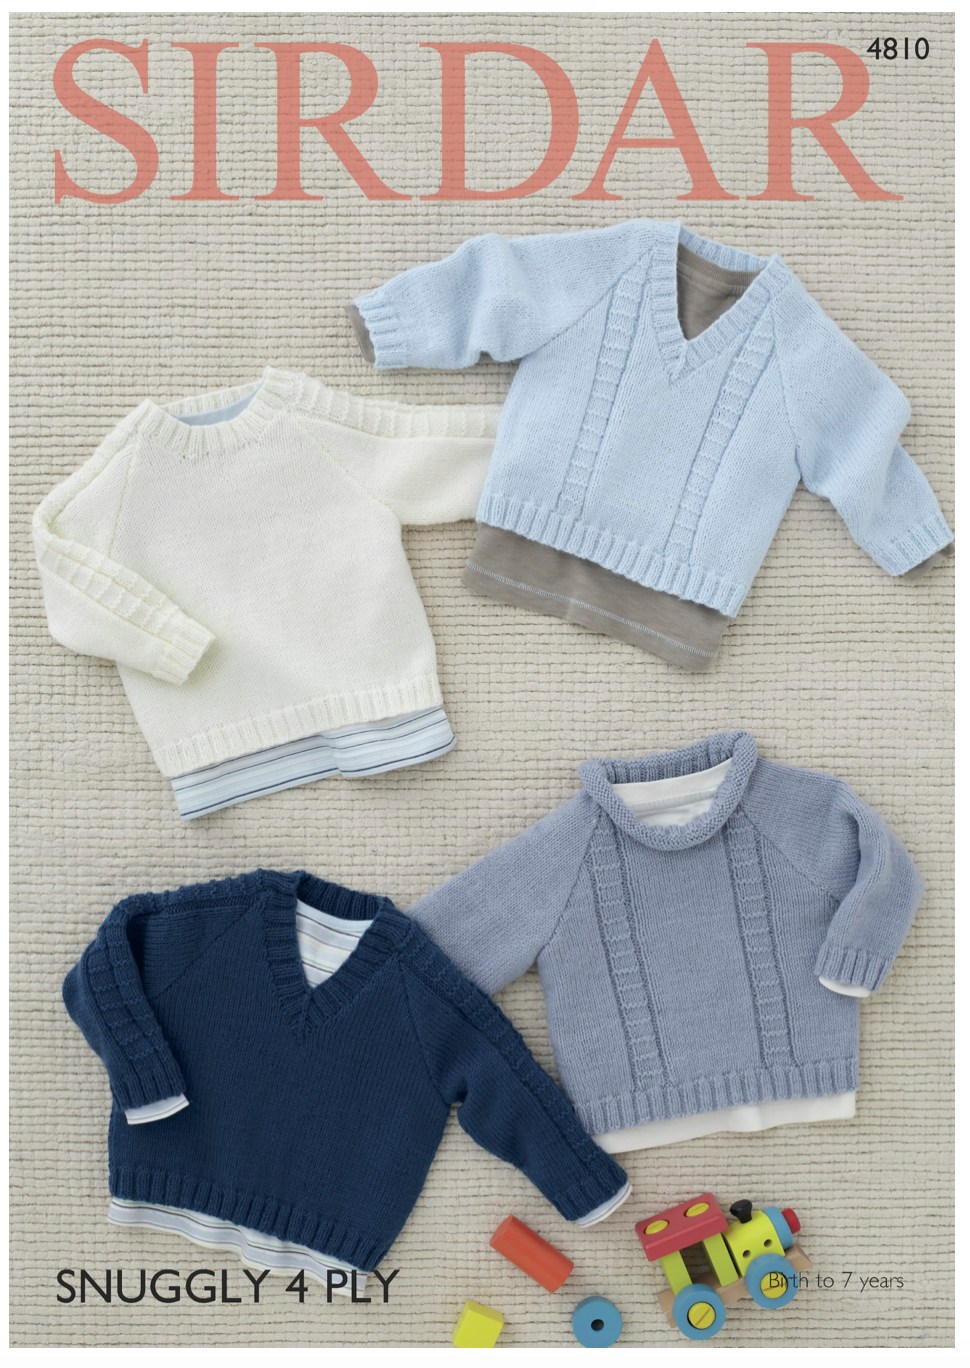 Sirdar Pattern 4810 Baby Jumpers in 4 Ply